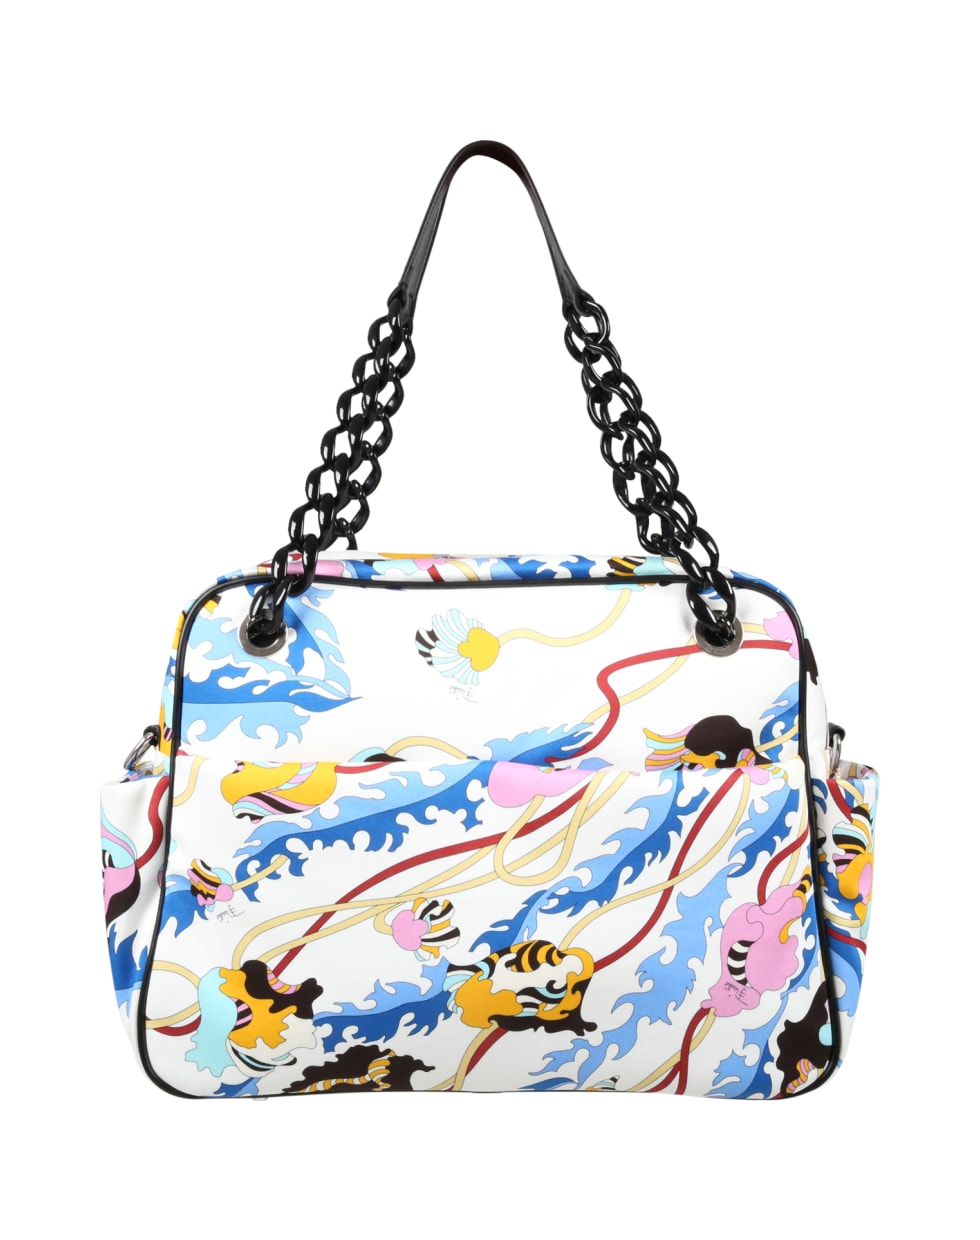 Emilio Pucci White Changing Bag For Baby Girl With Iconic Print - Multicolor